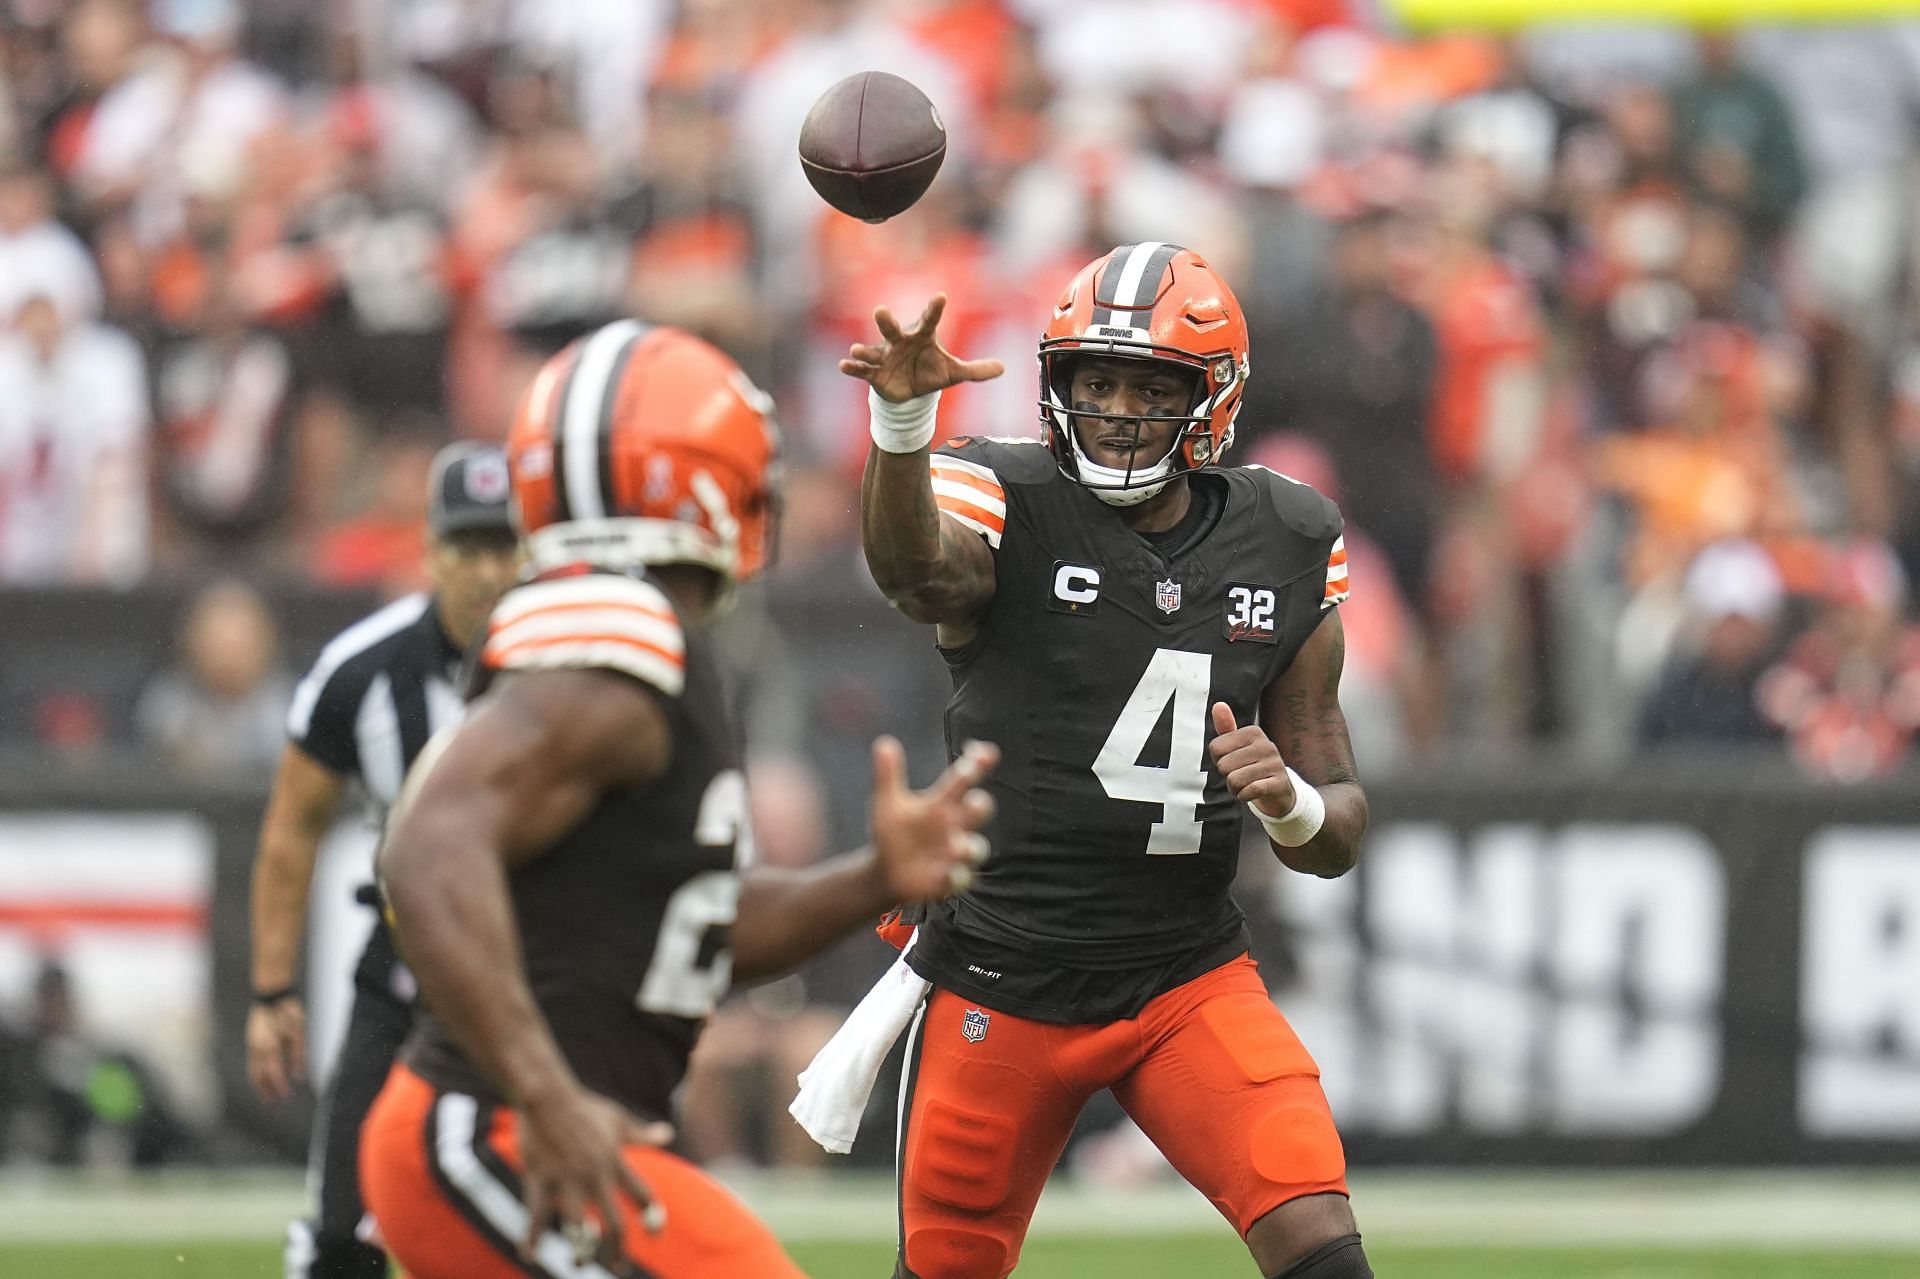 How to watch Steelers vs. Browns: TV schedule, live stream details and more